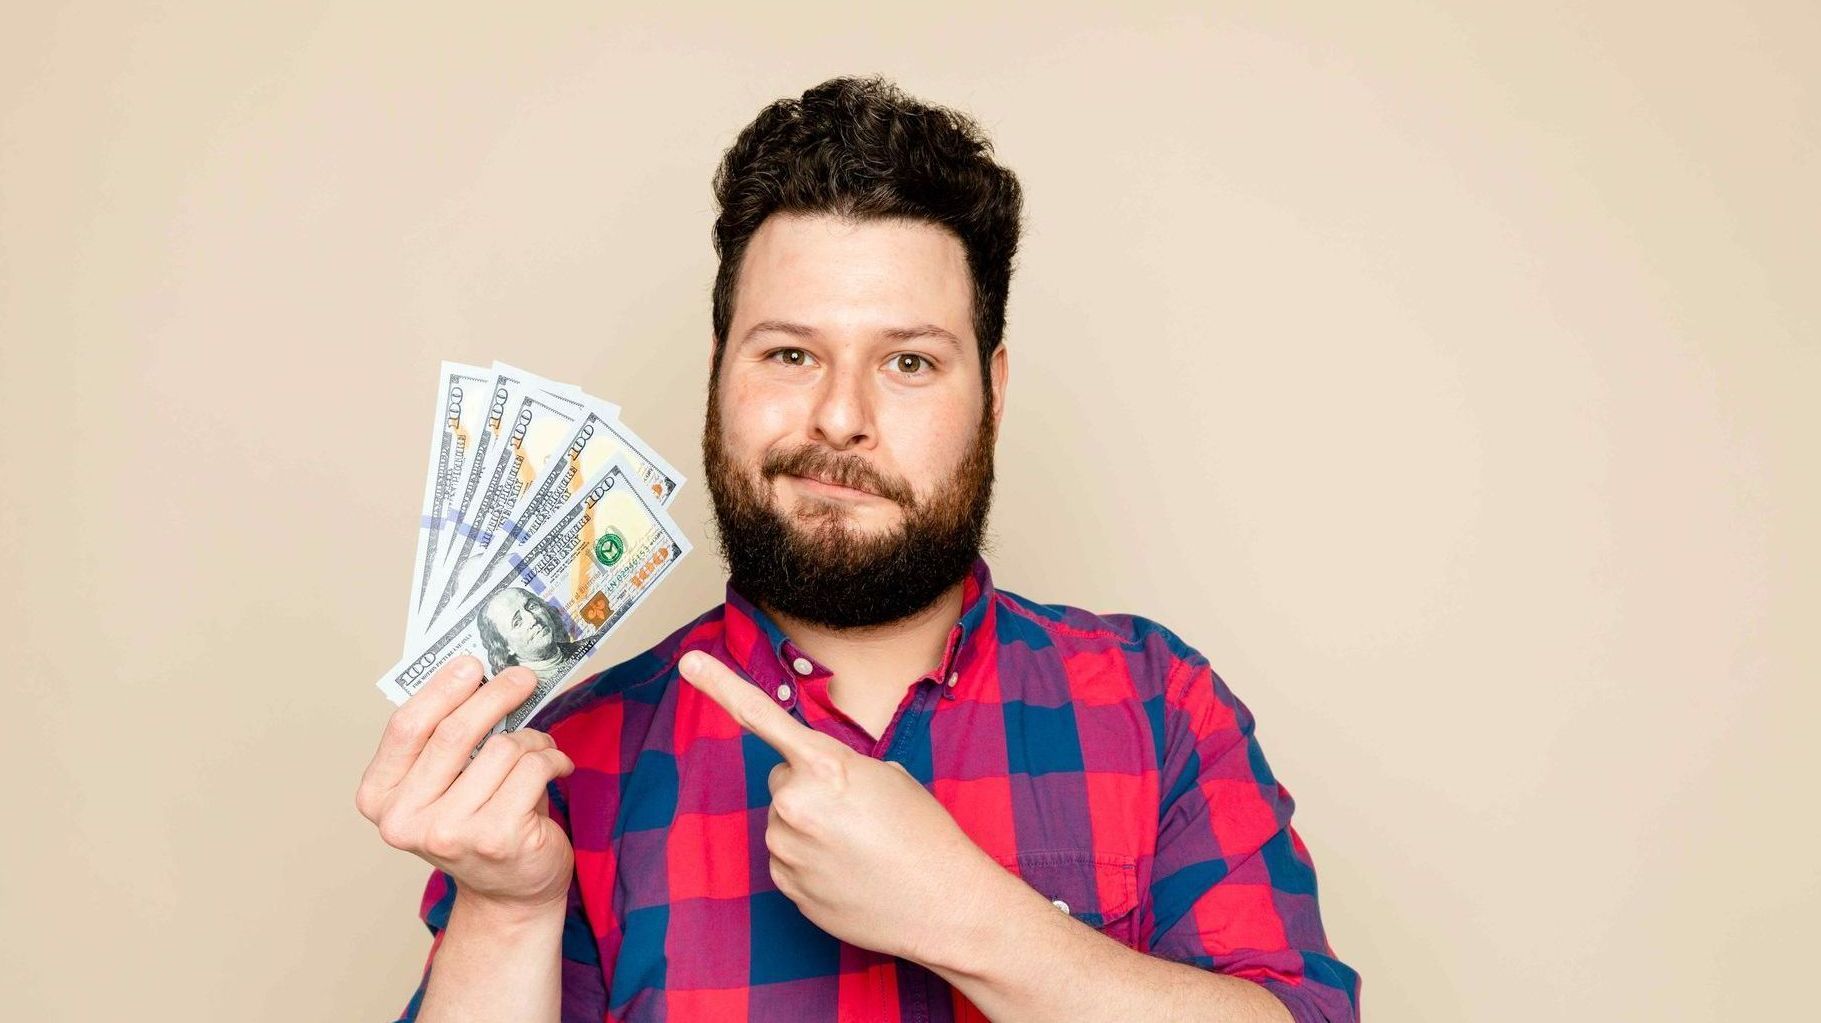 man pointing with his left hand to the money he is holding in his right hand while smirking